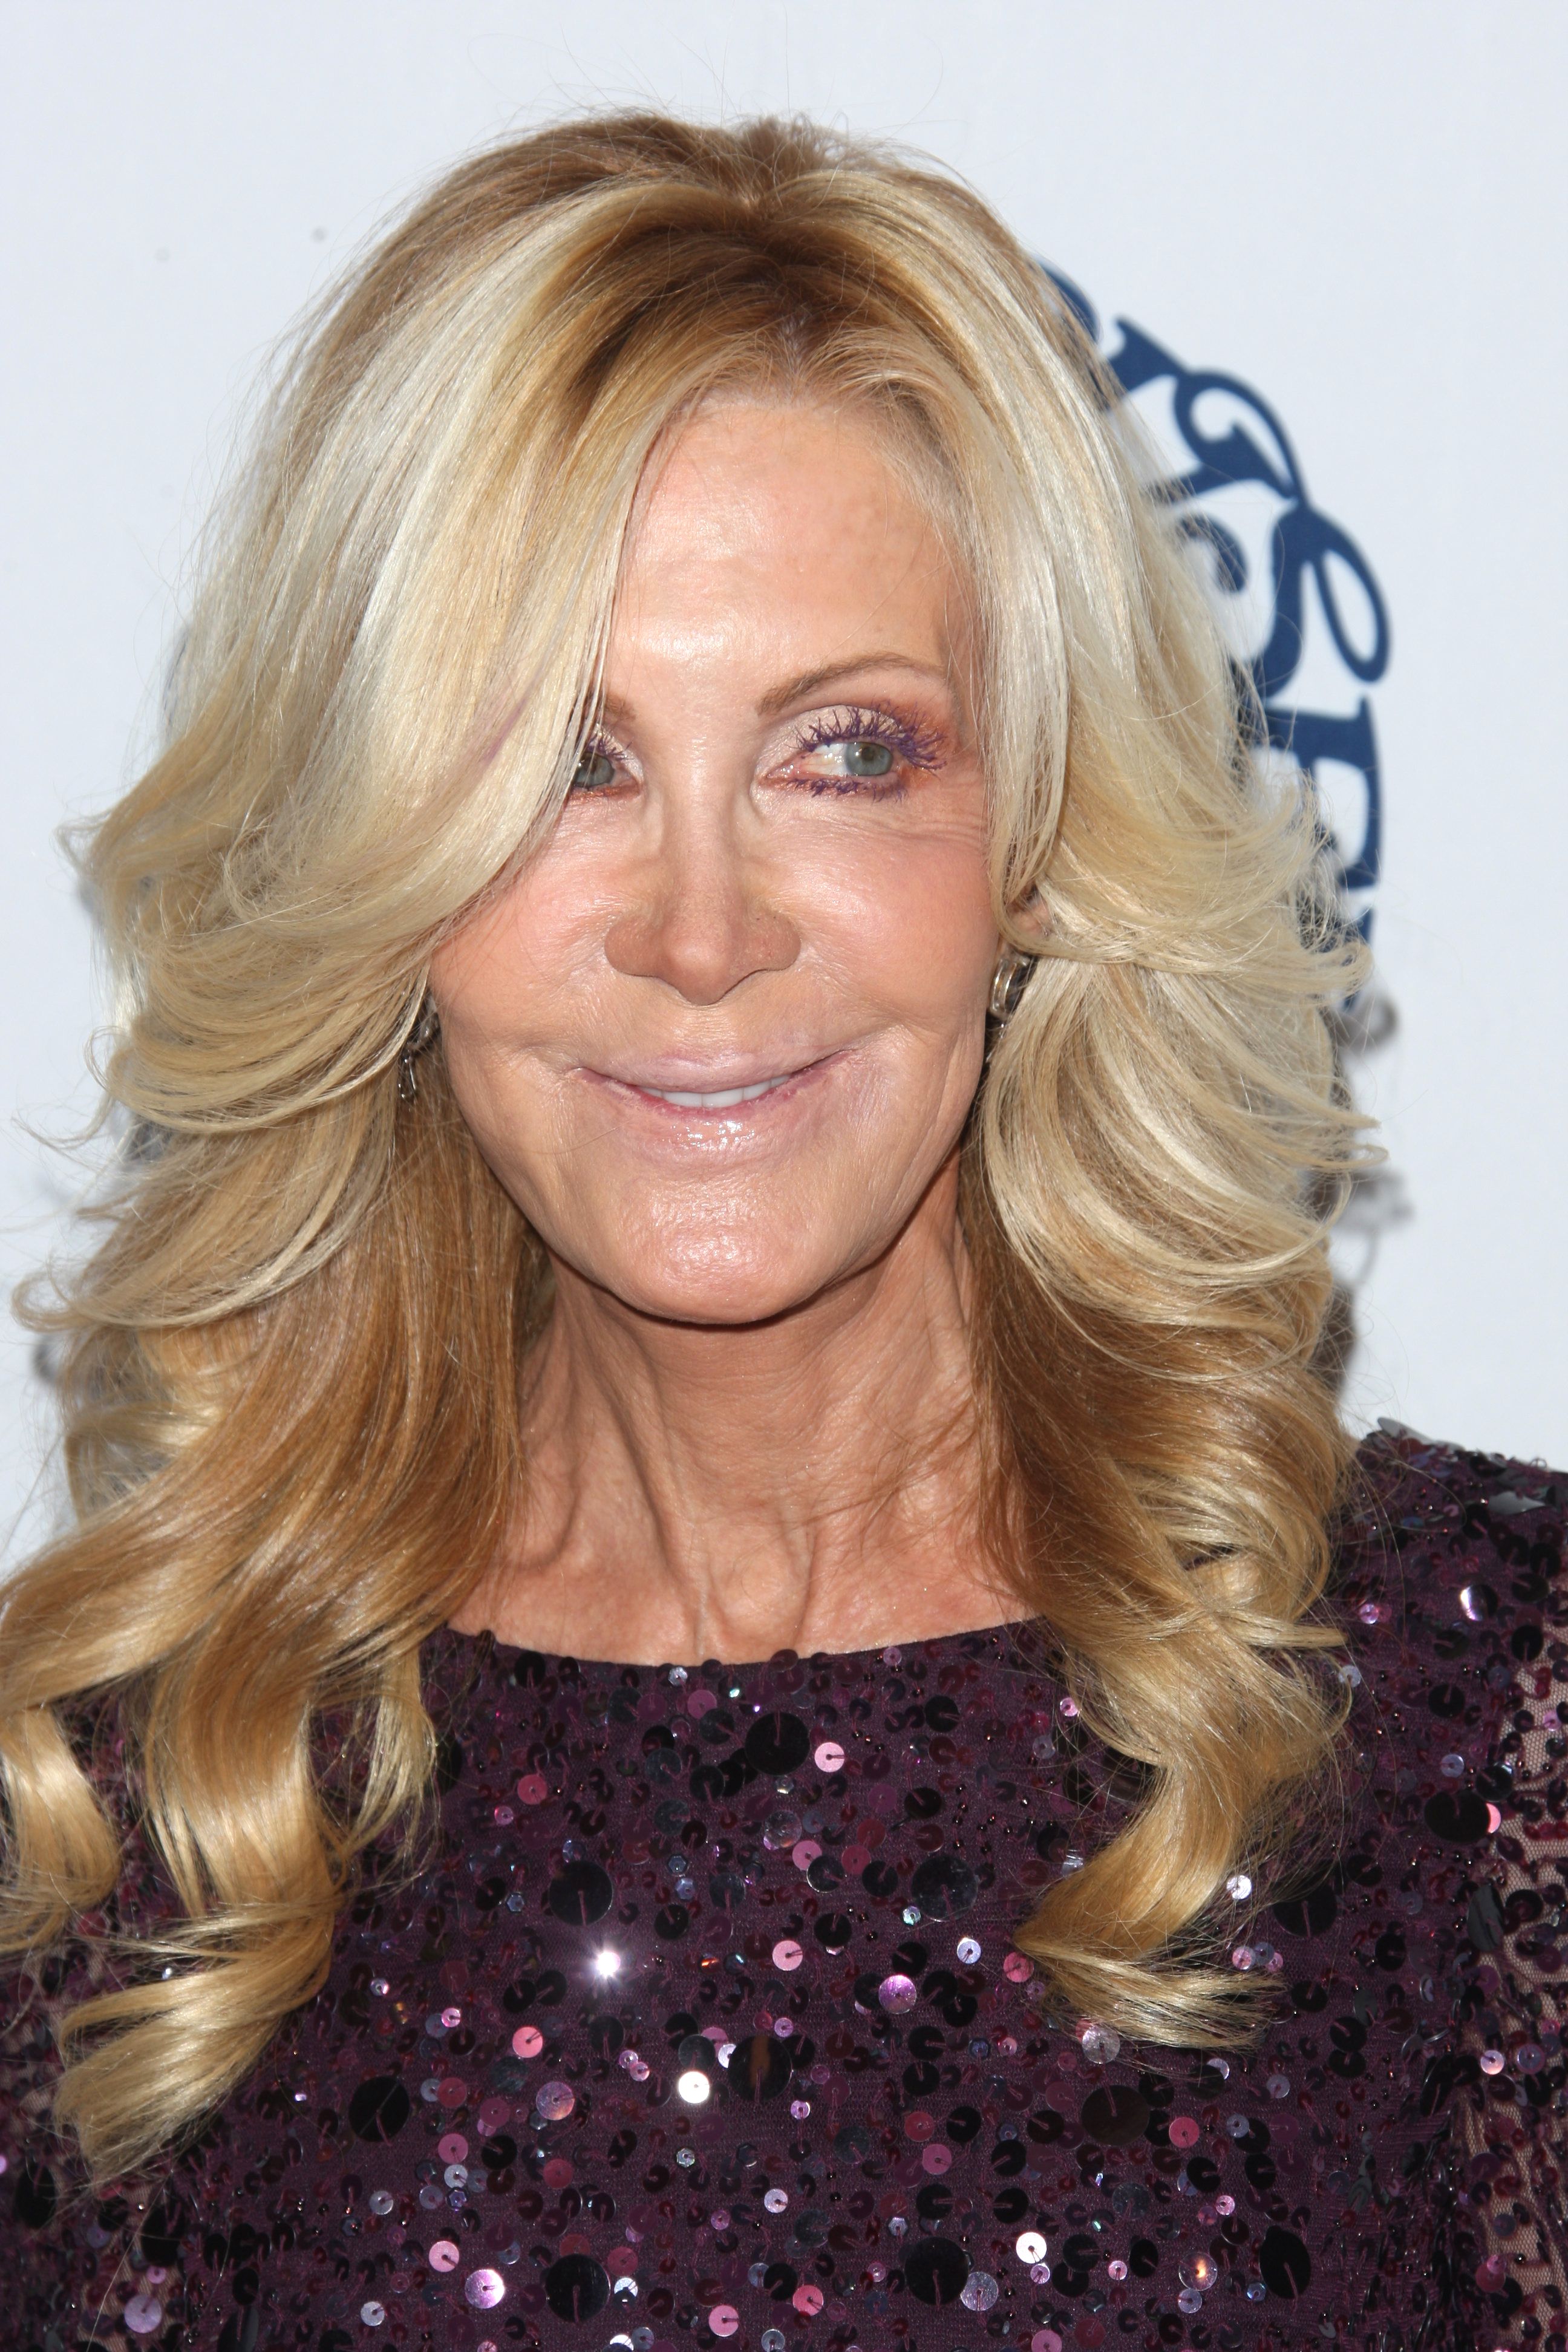 <p><span>Joan Van Ark still looked like a wealthy wife -- just a little bit more "Real Housewives" than prime-time soap opera -- during the 2010 Carousel of Hope Ball.</span></p>